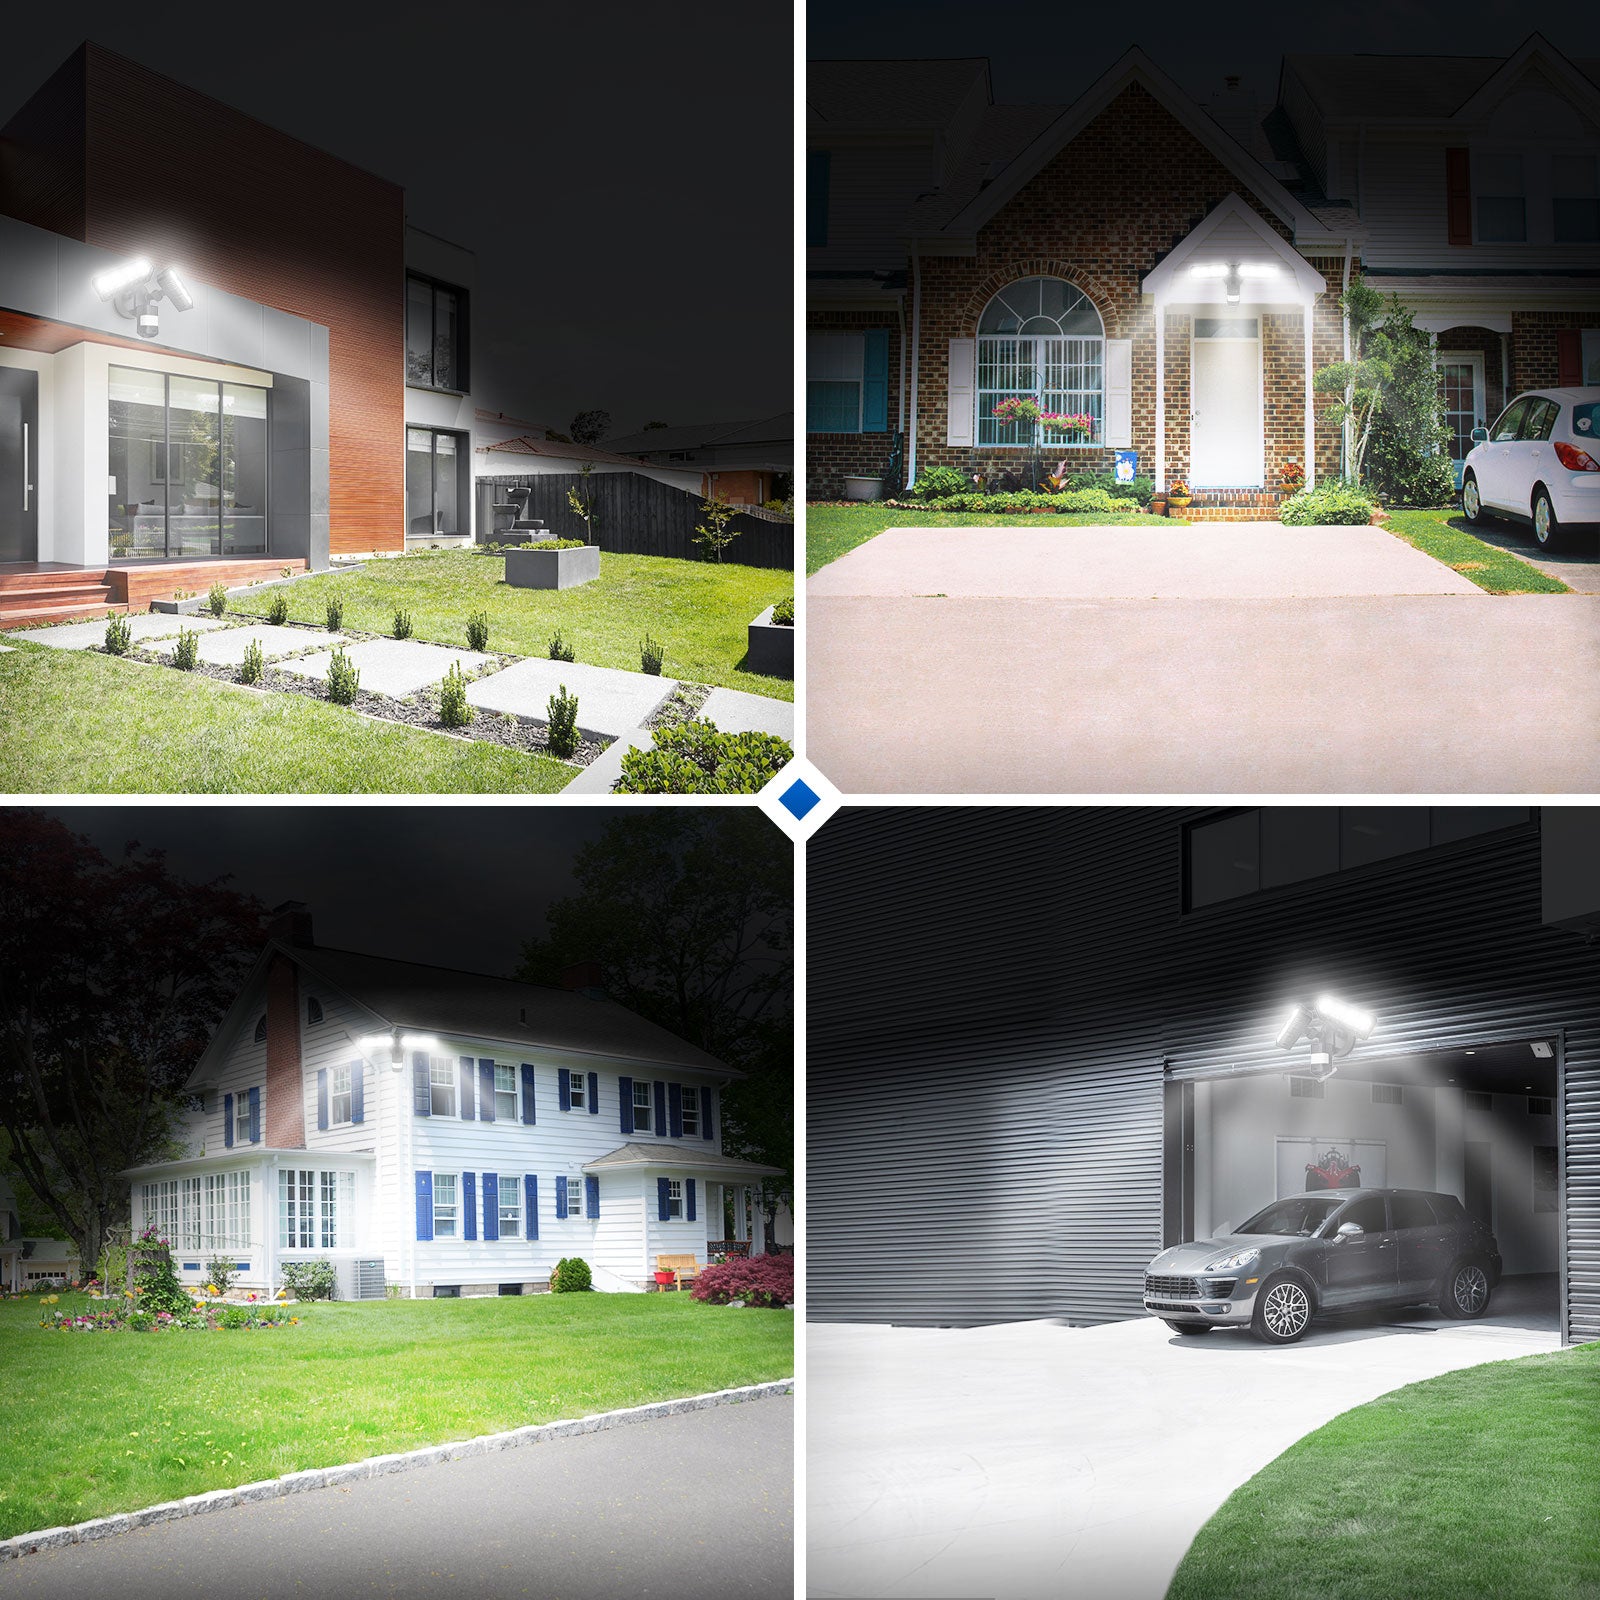 27W LED Security Light (Dusk to Dawn & Motion Sensor) suitable for park, yard, garage and extra